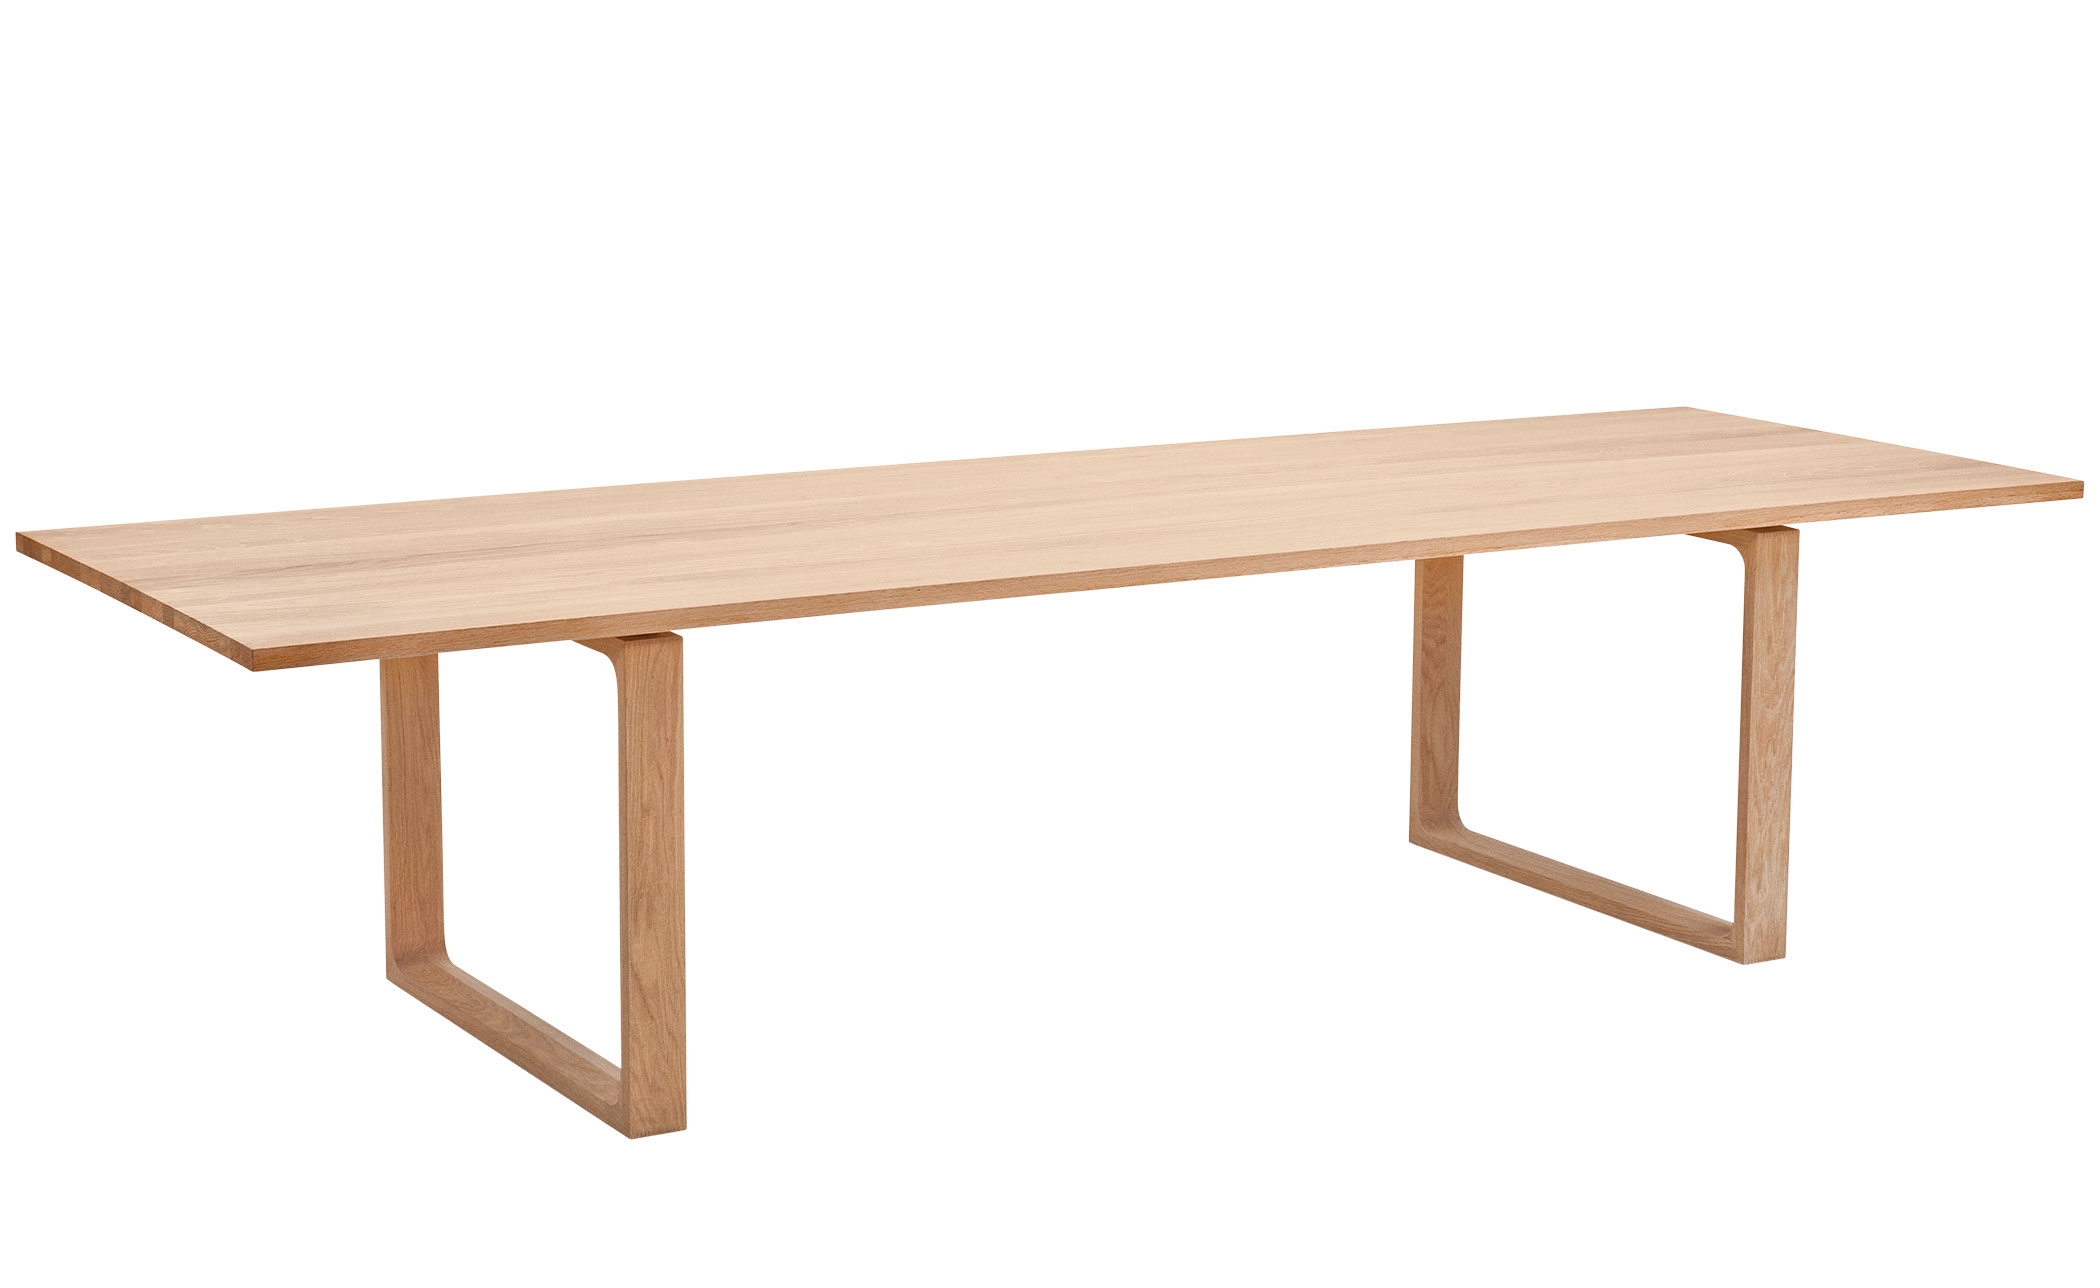 Table by for Hansen | hive